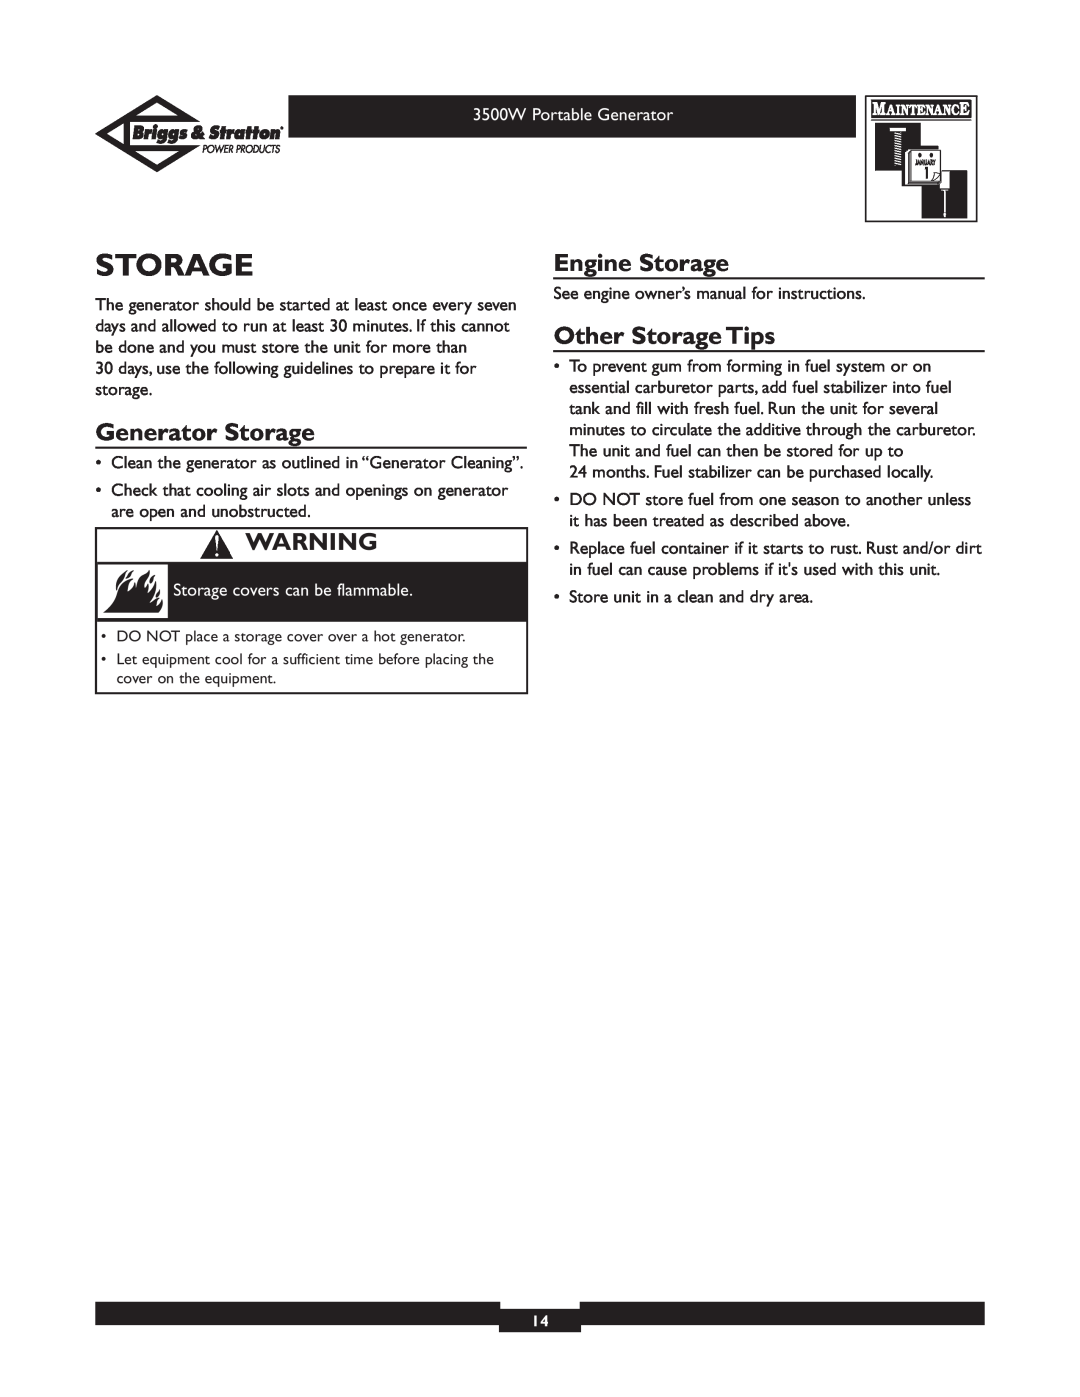 Briggs & Stratton 30208 Generator Storage, Engine Storage, Other Storage Tips, Storage covers can be flammable 